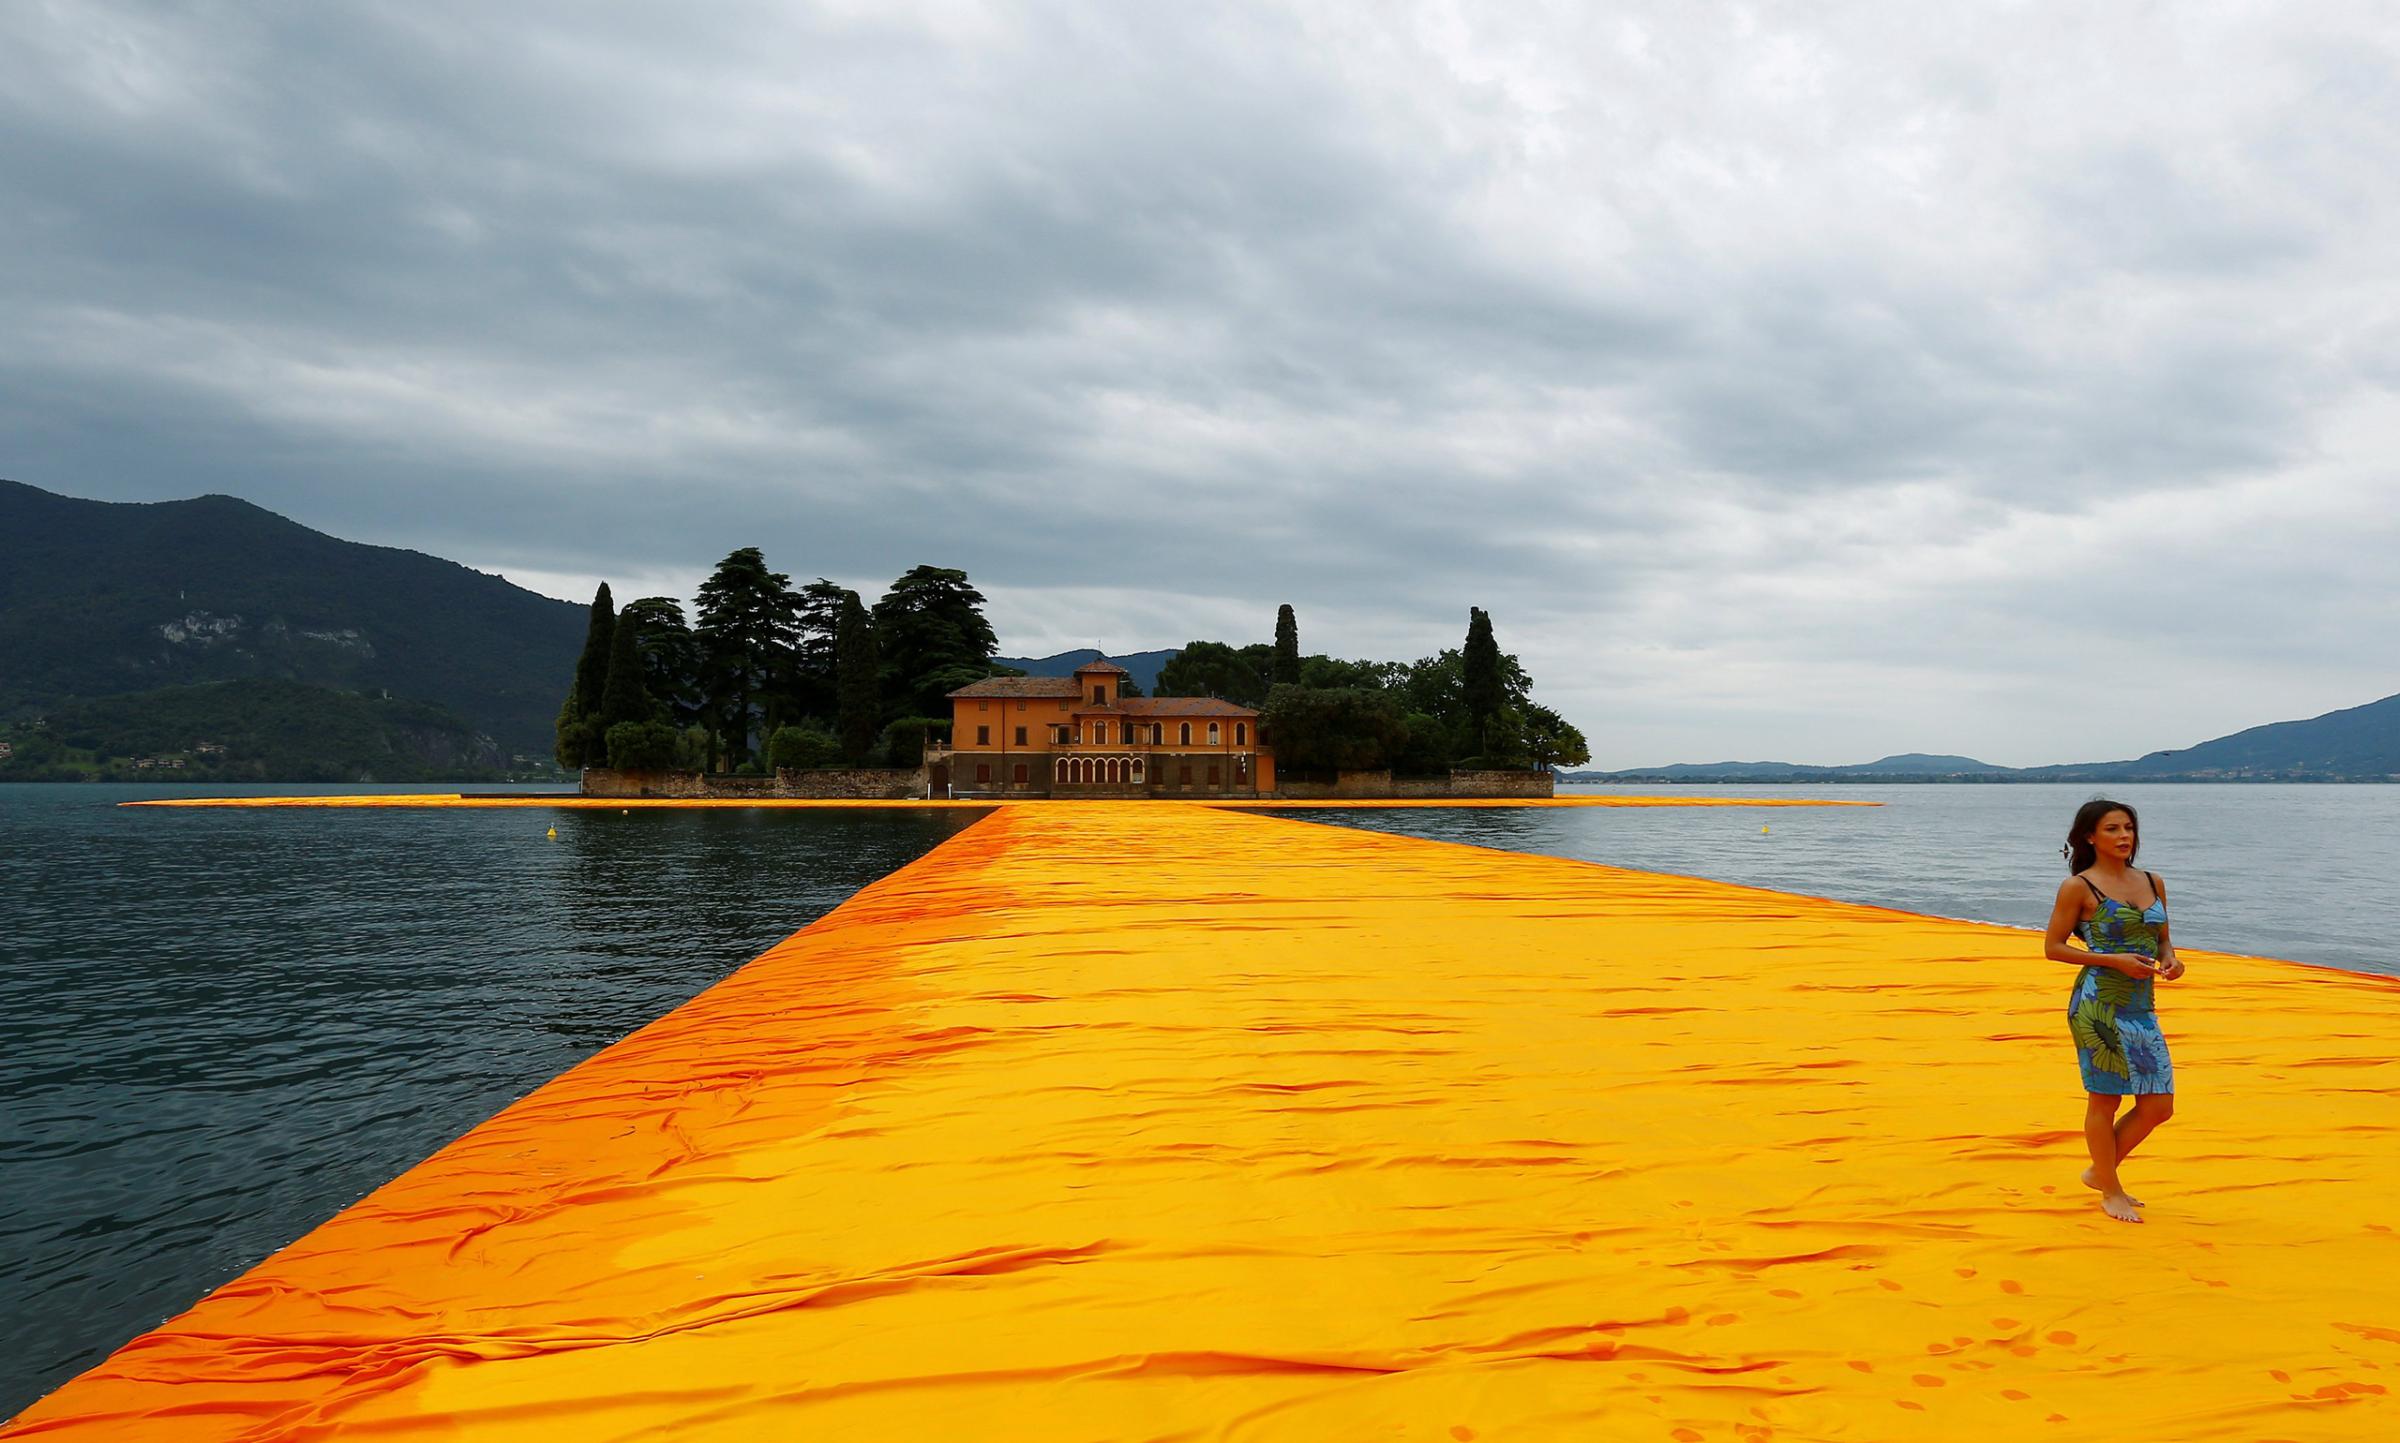 A woman walks on the installation 'The Floating Piers' by Bulgarian-born artist Christo Vladimirov Yavachev known as Christo, on the Lake Iseo, northern Italy on June 16, 2016.